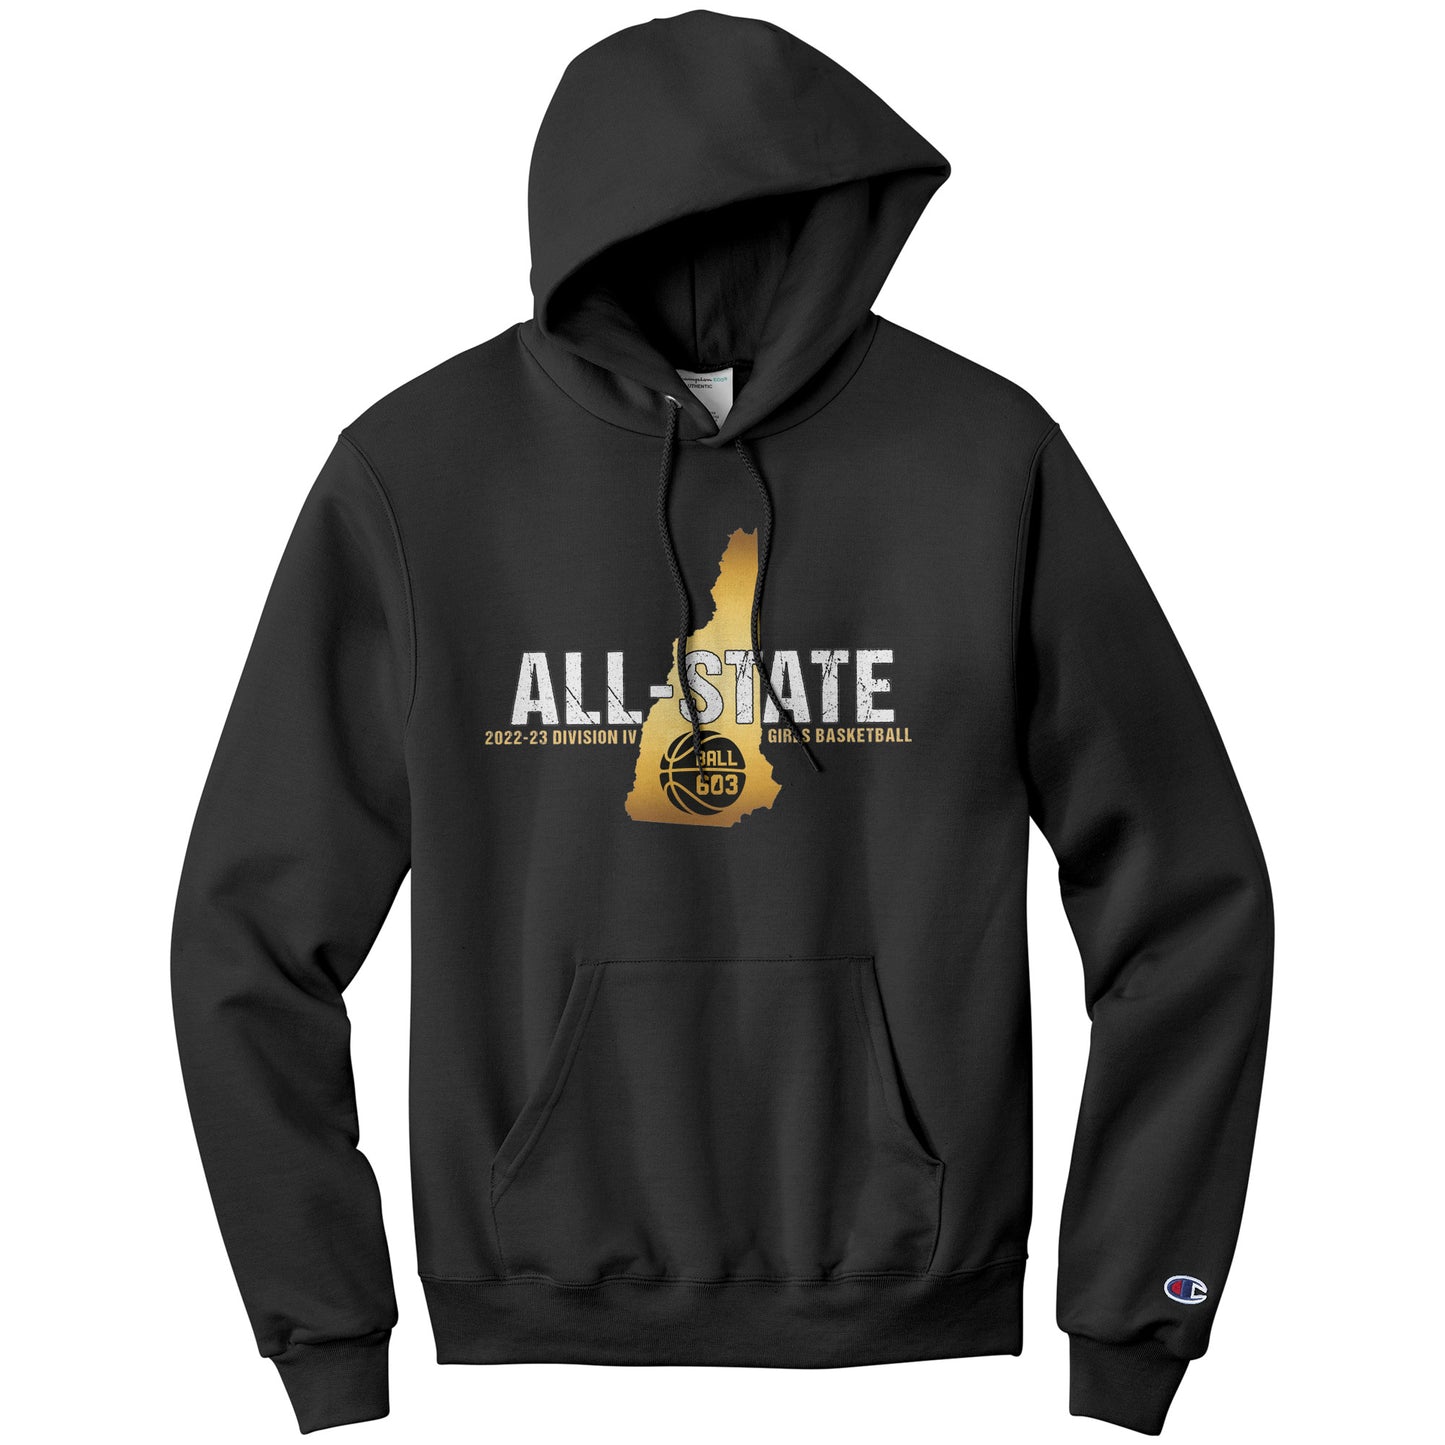 All-State D4 Girls: Champion Hoodie